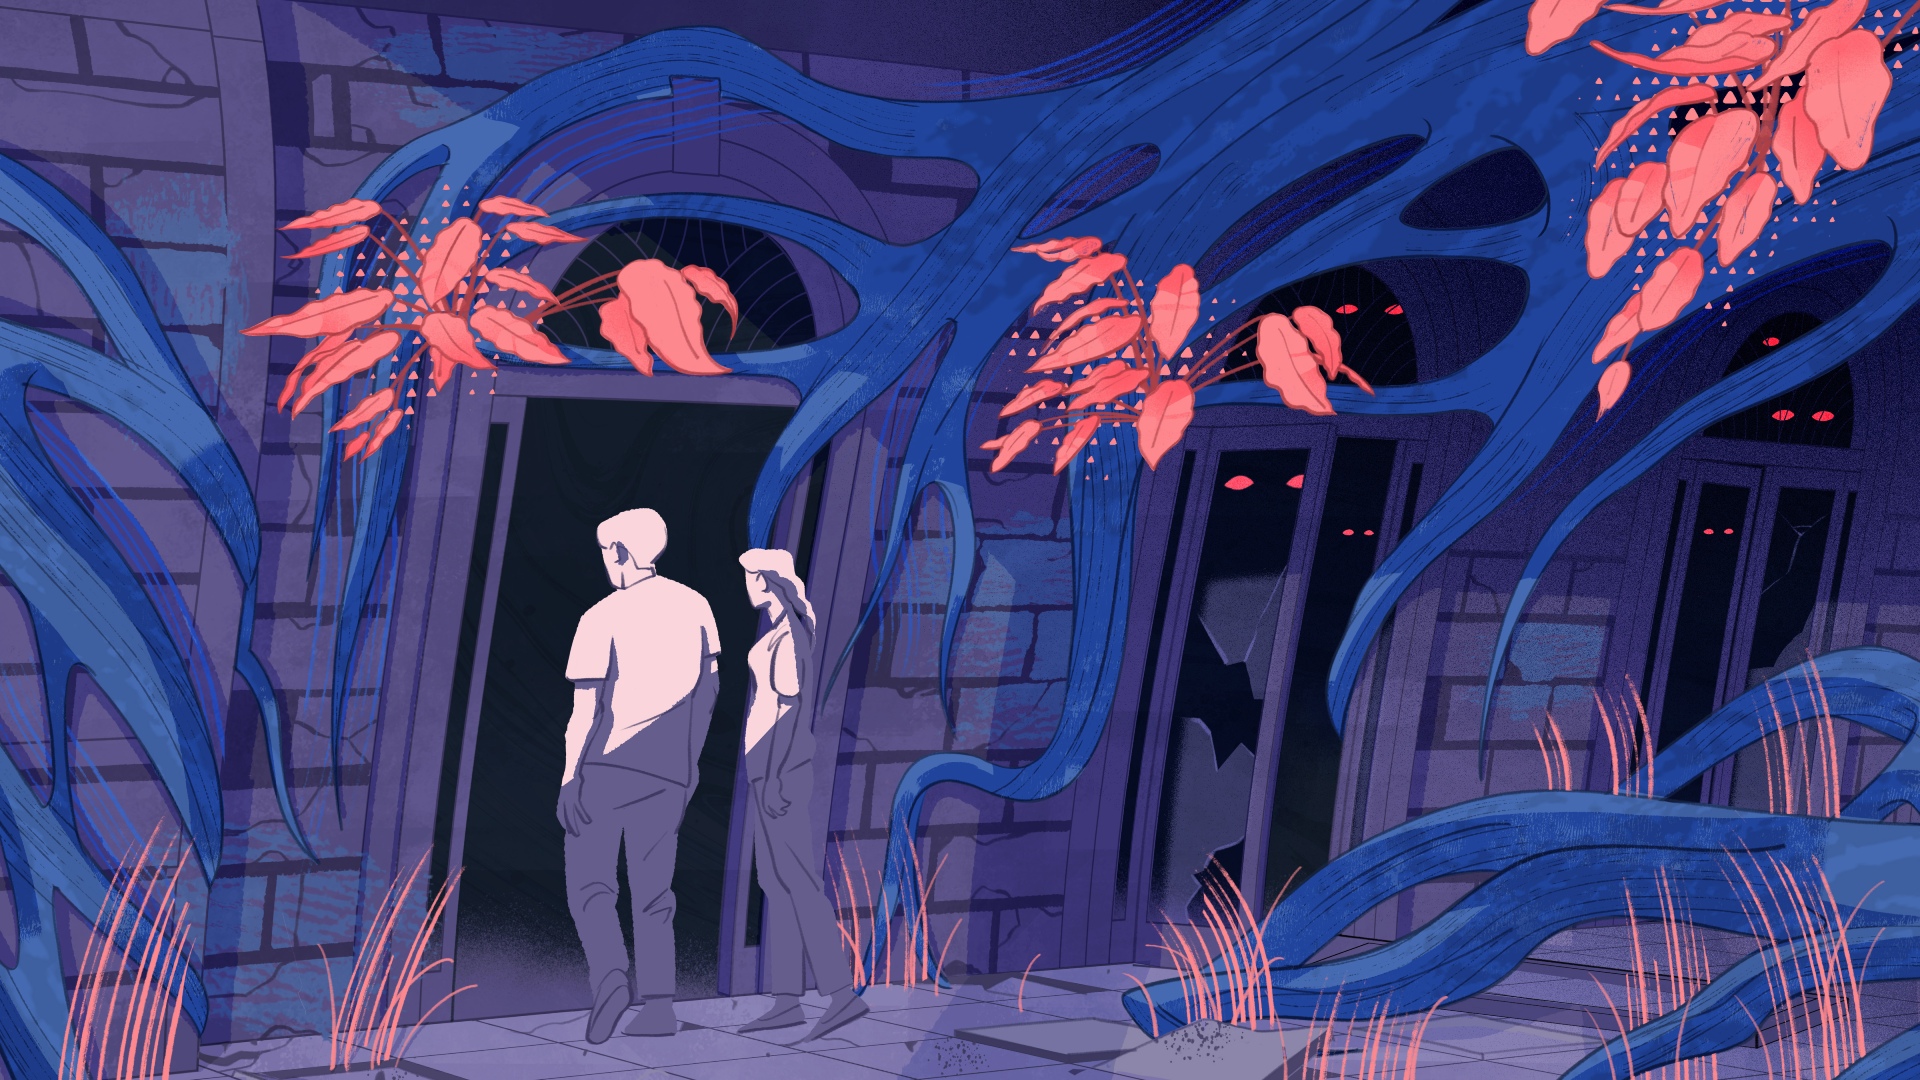 Illustration in dark, muted colors shows a man and a woman standing outside a run down building covered in vines